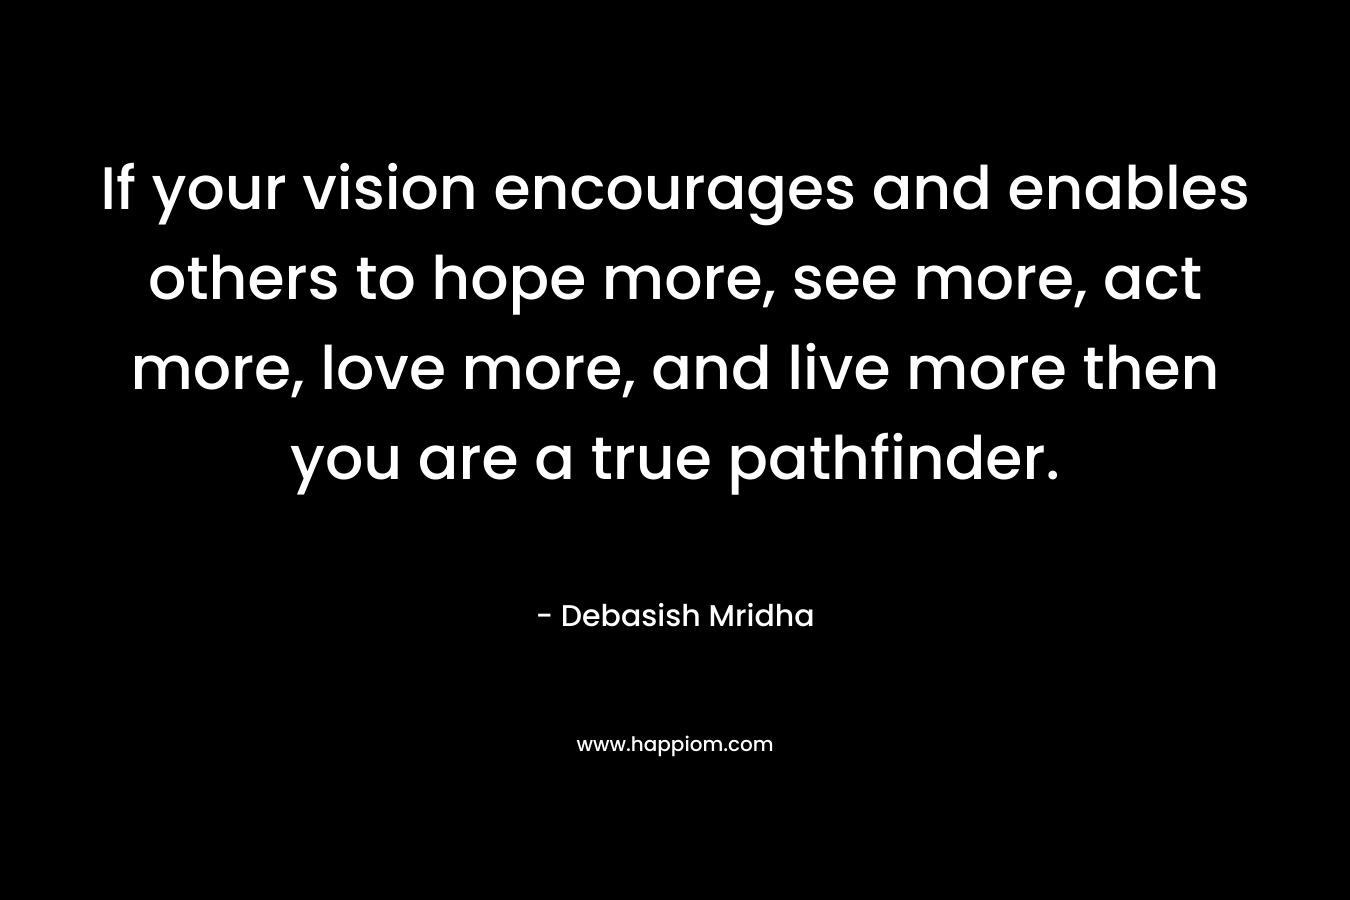 If your vision encourages and enables others to hope more, see more, act more, love more, and live more then you are a true pathfinder.